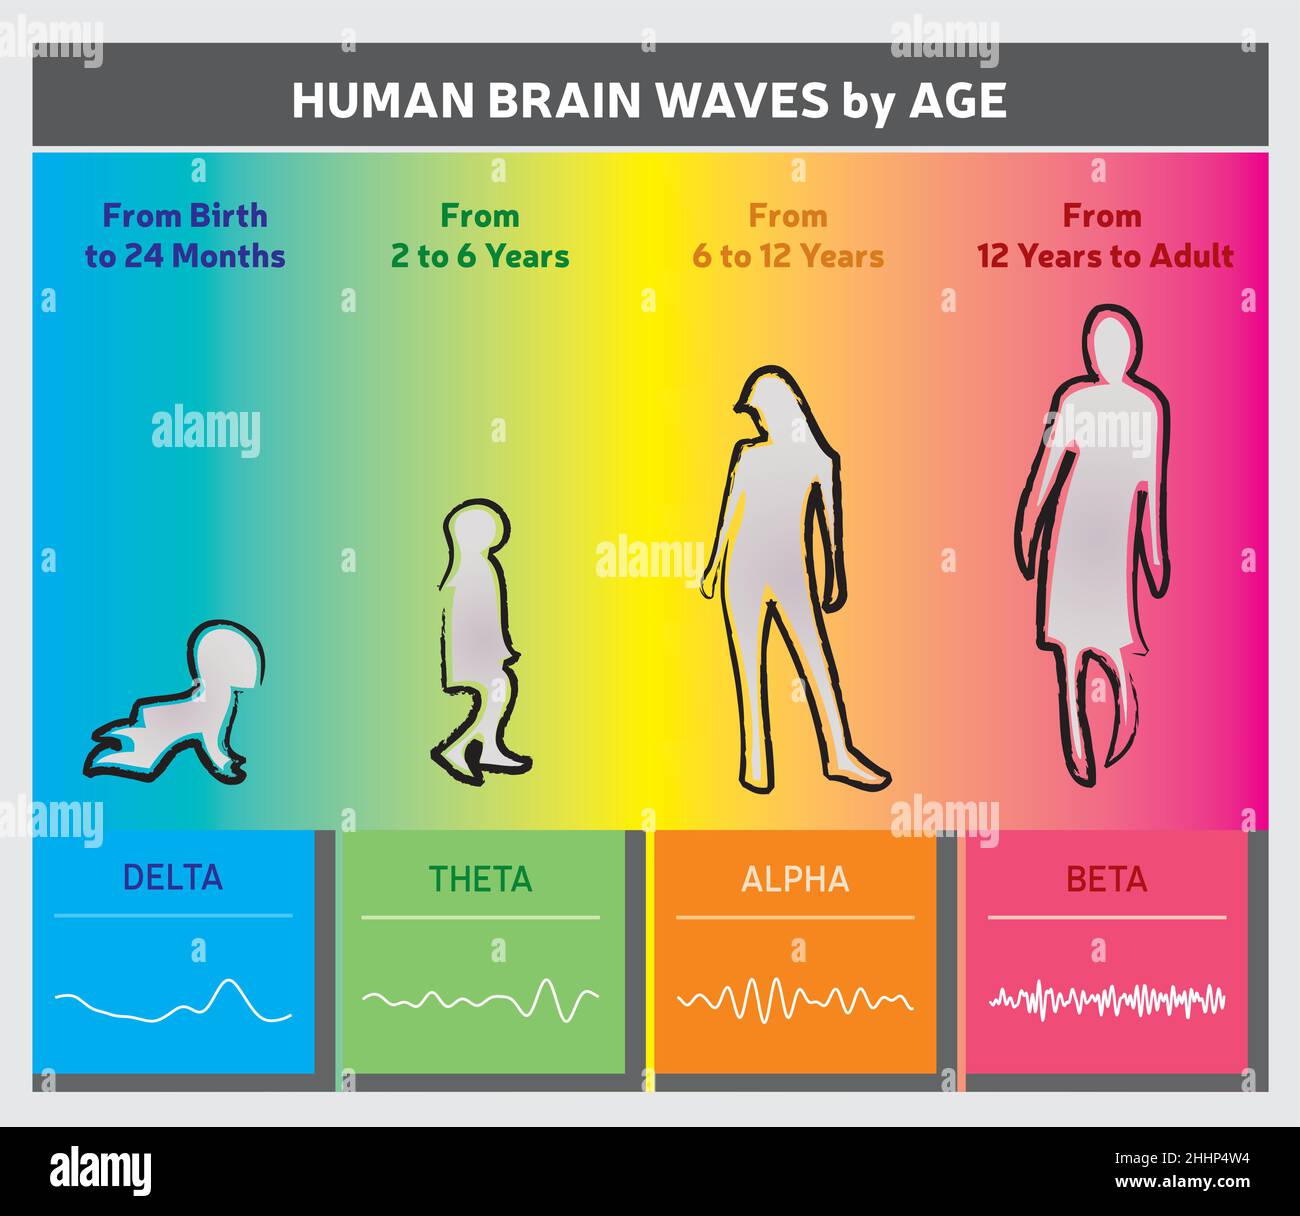 Human Brain Waves by Age Chart Diagram - People Silhouettes - Rainbow Colors Stock Vector